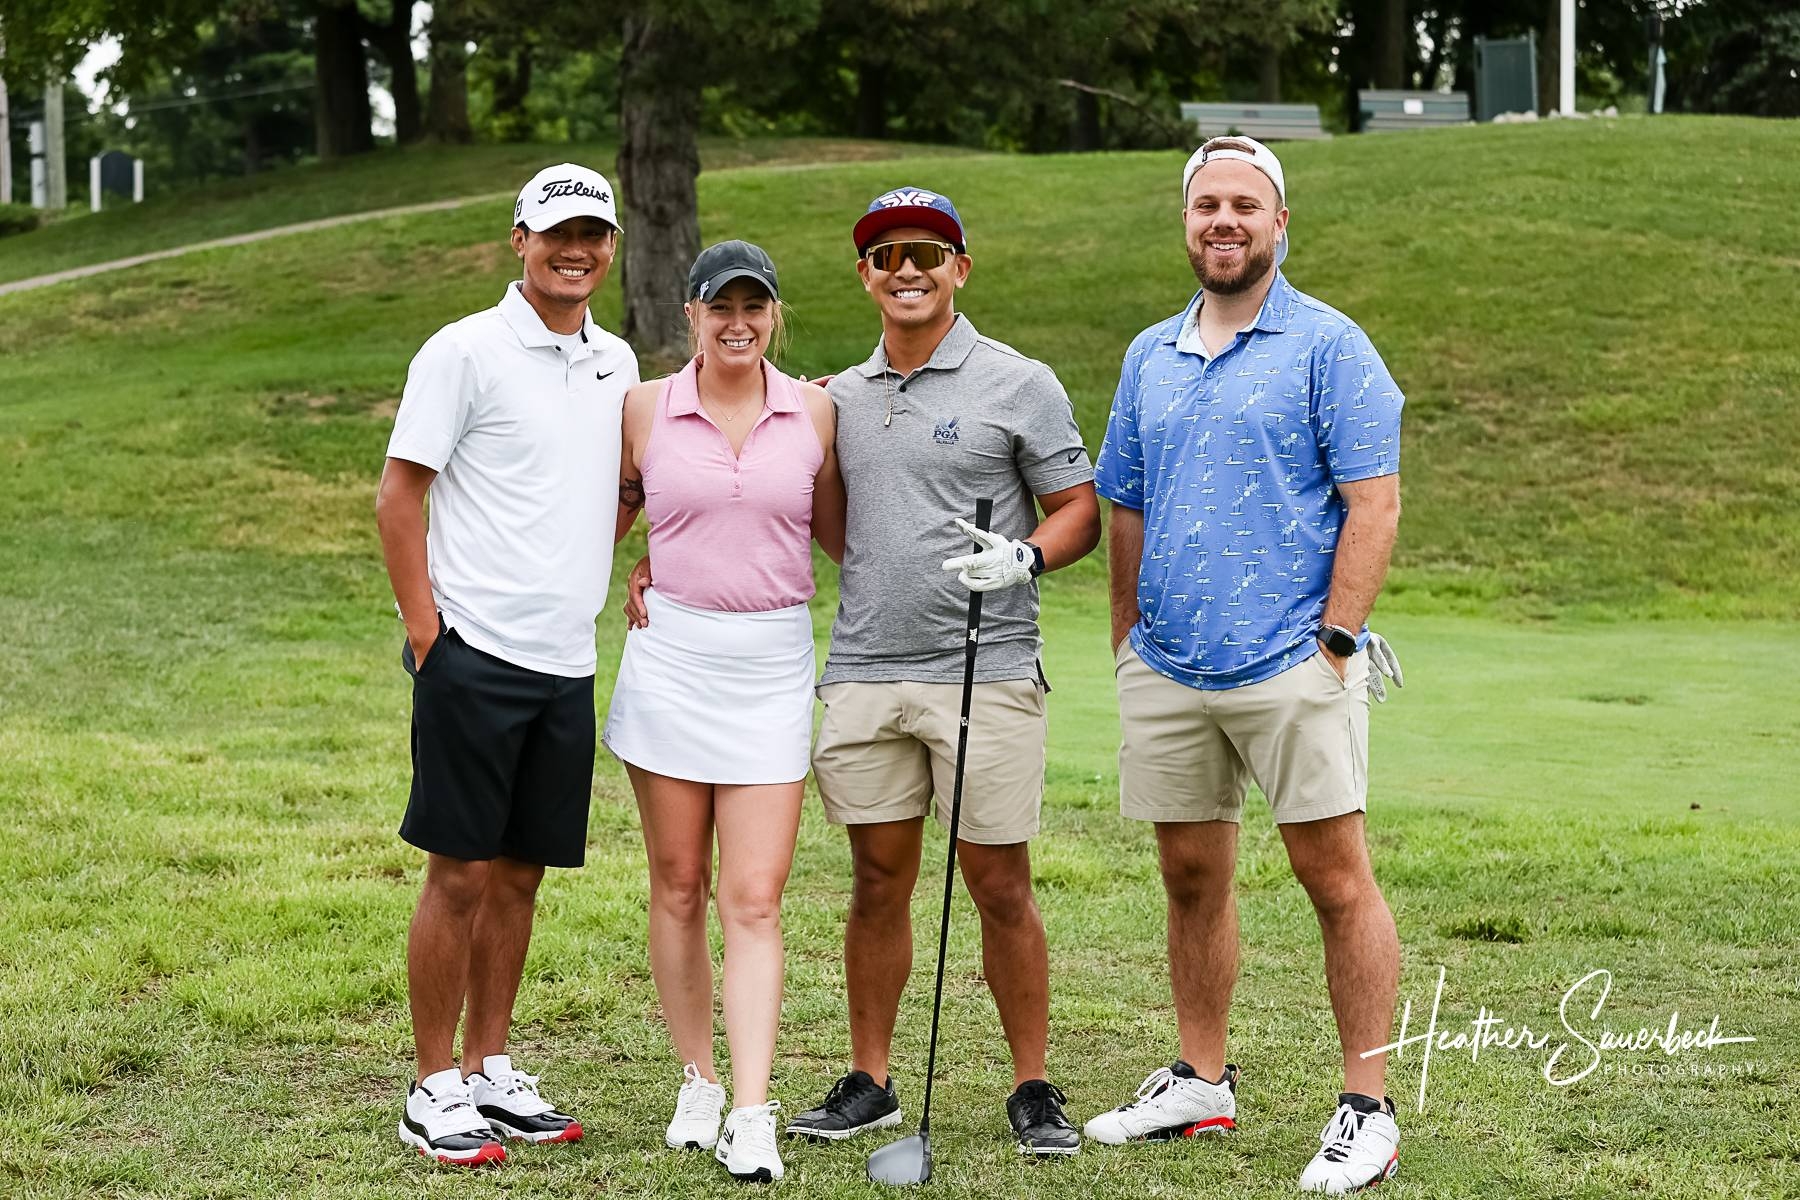 Heather Son and team claim top spot in NW Booster Golf Outing - Content Image for demo7363_bigteams_2474